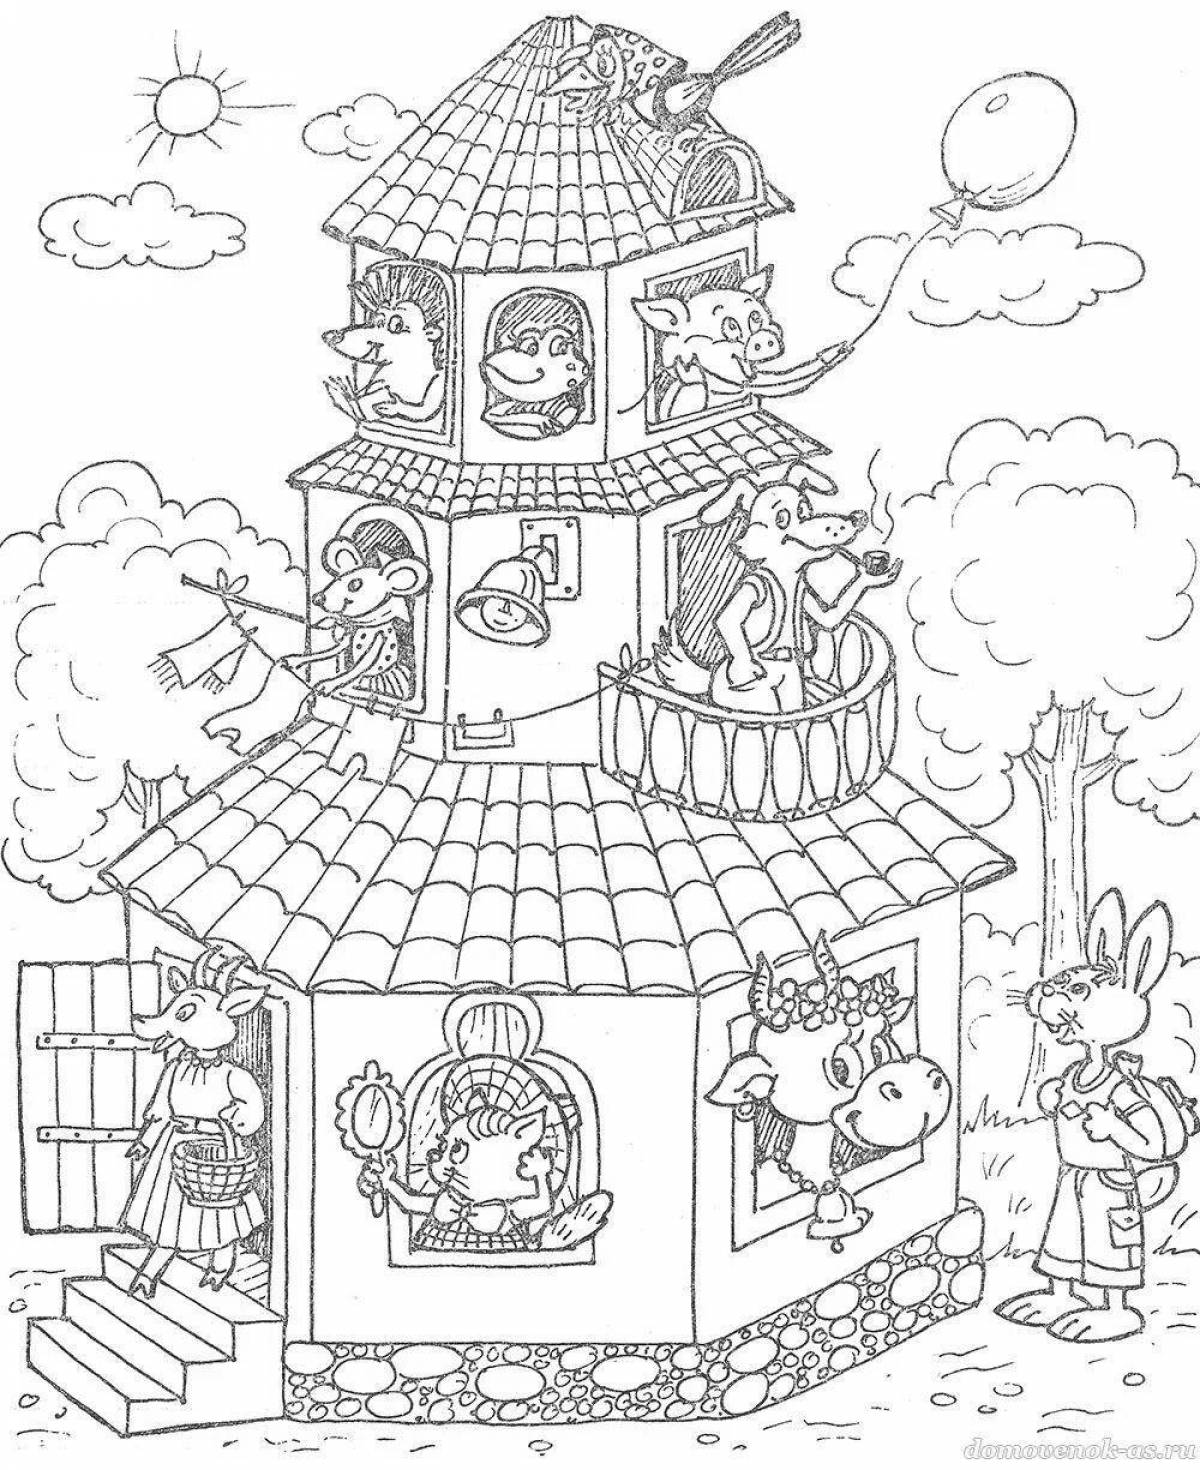 Superb cat house coloring book for babies